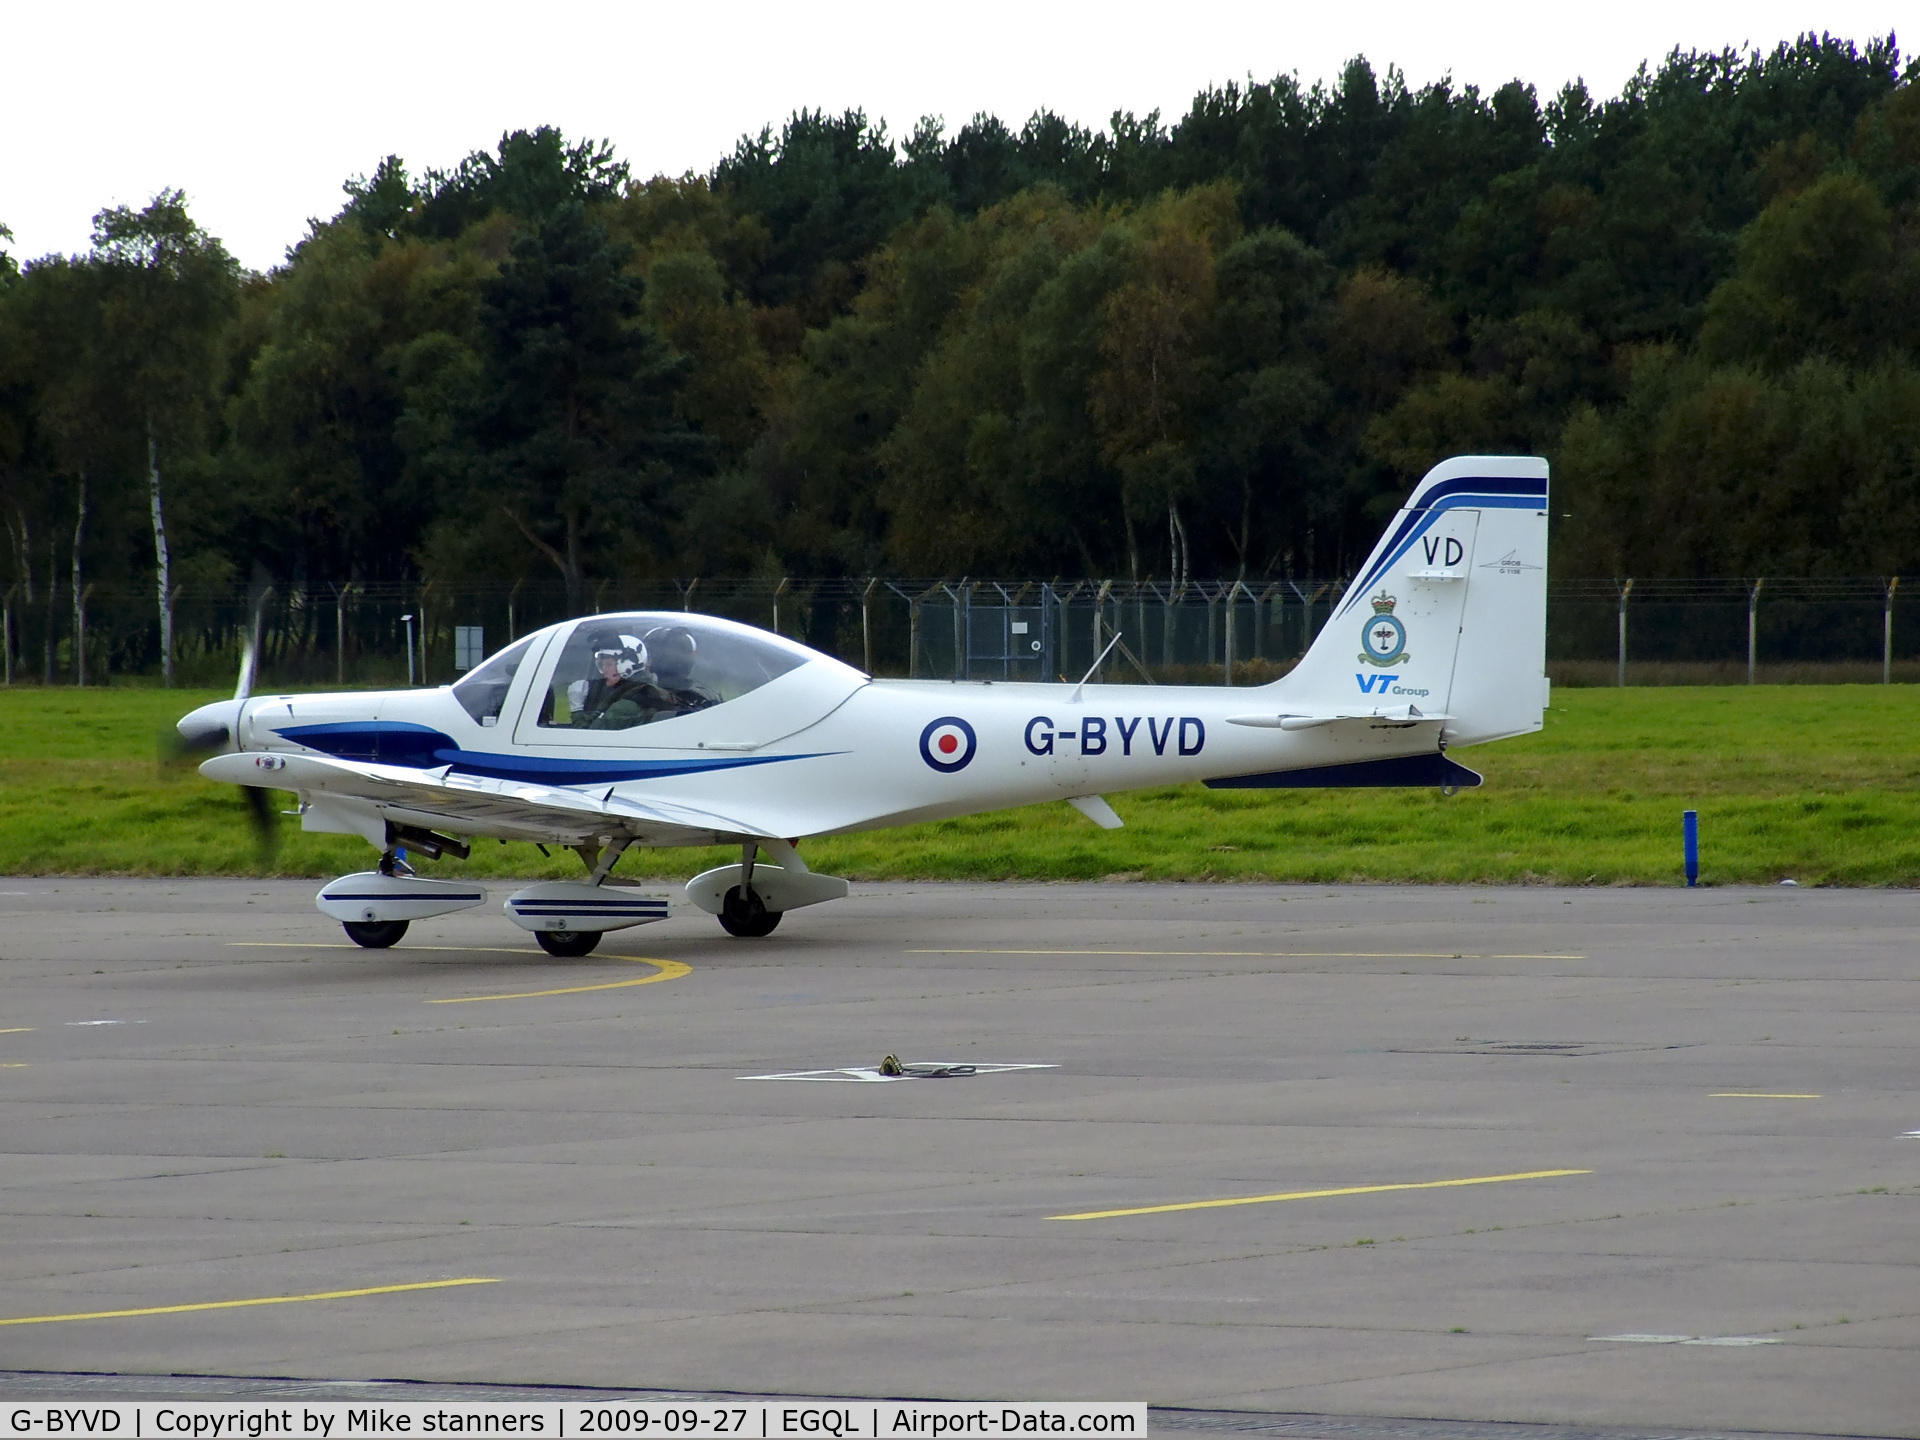 G-BYVD, 2000 Grob G-115E Tutor T1 C/N 82114/E, 1EFTS/12AEF Tutor taxiing out for another air experience flight